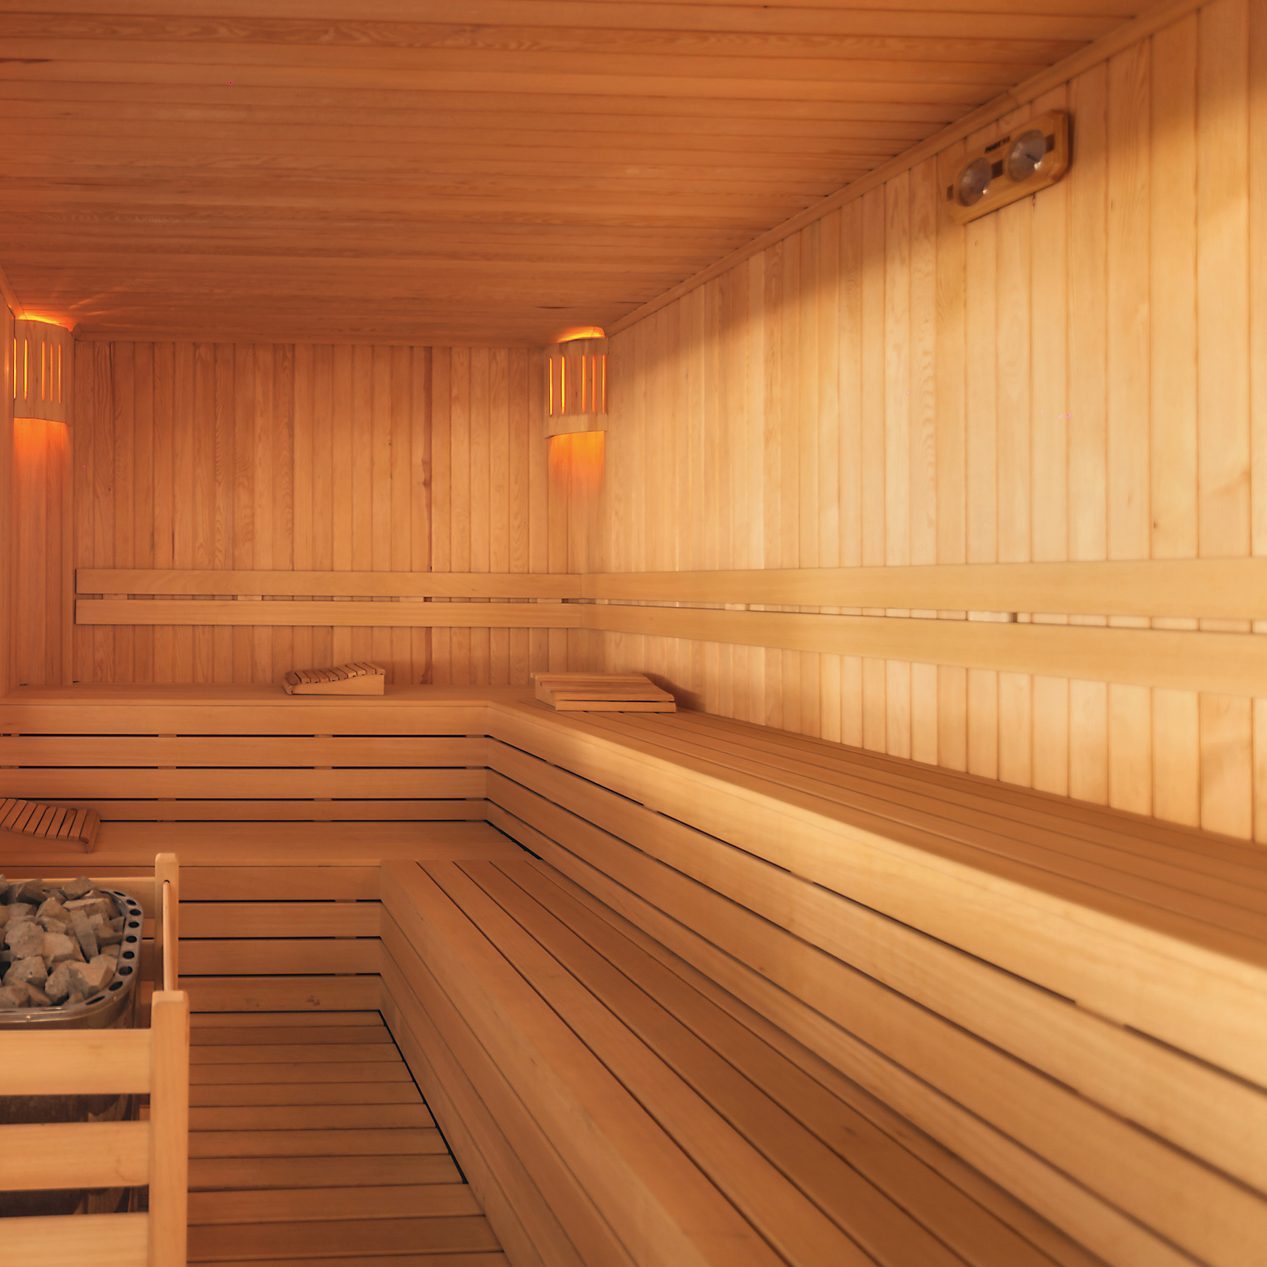 Dry Sauna vs. Wet Sauna: What's the Difference?